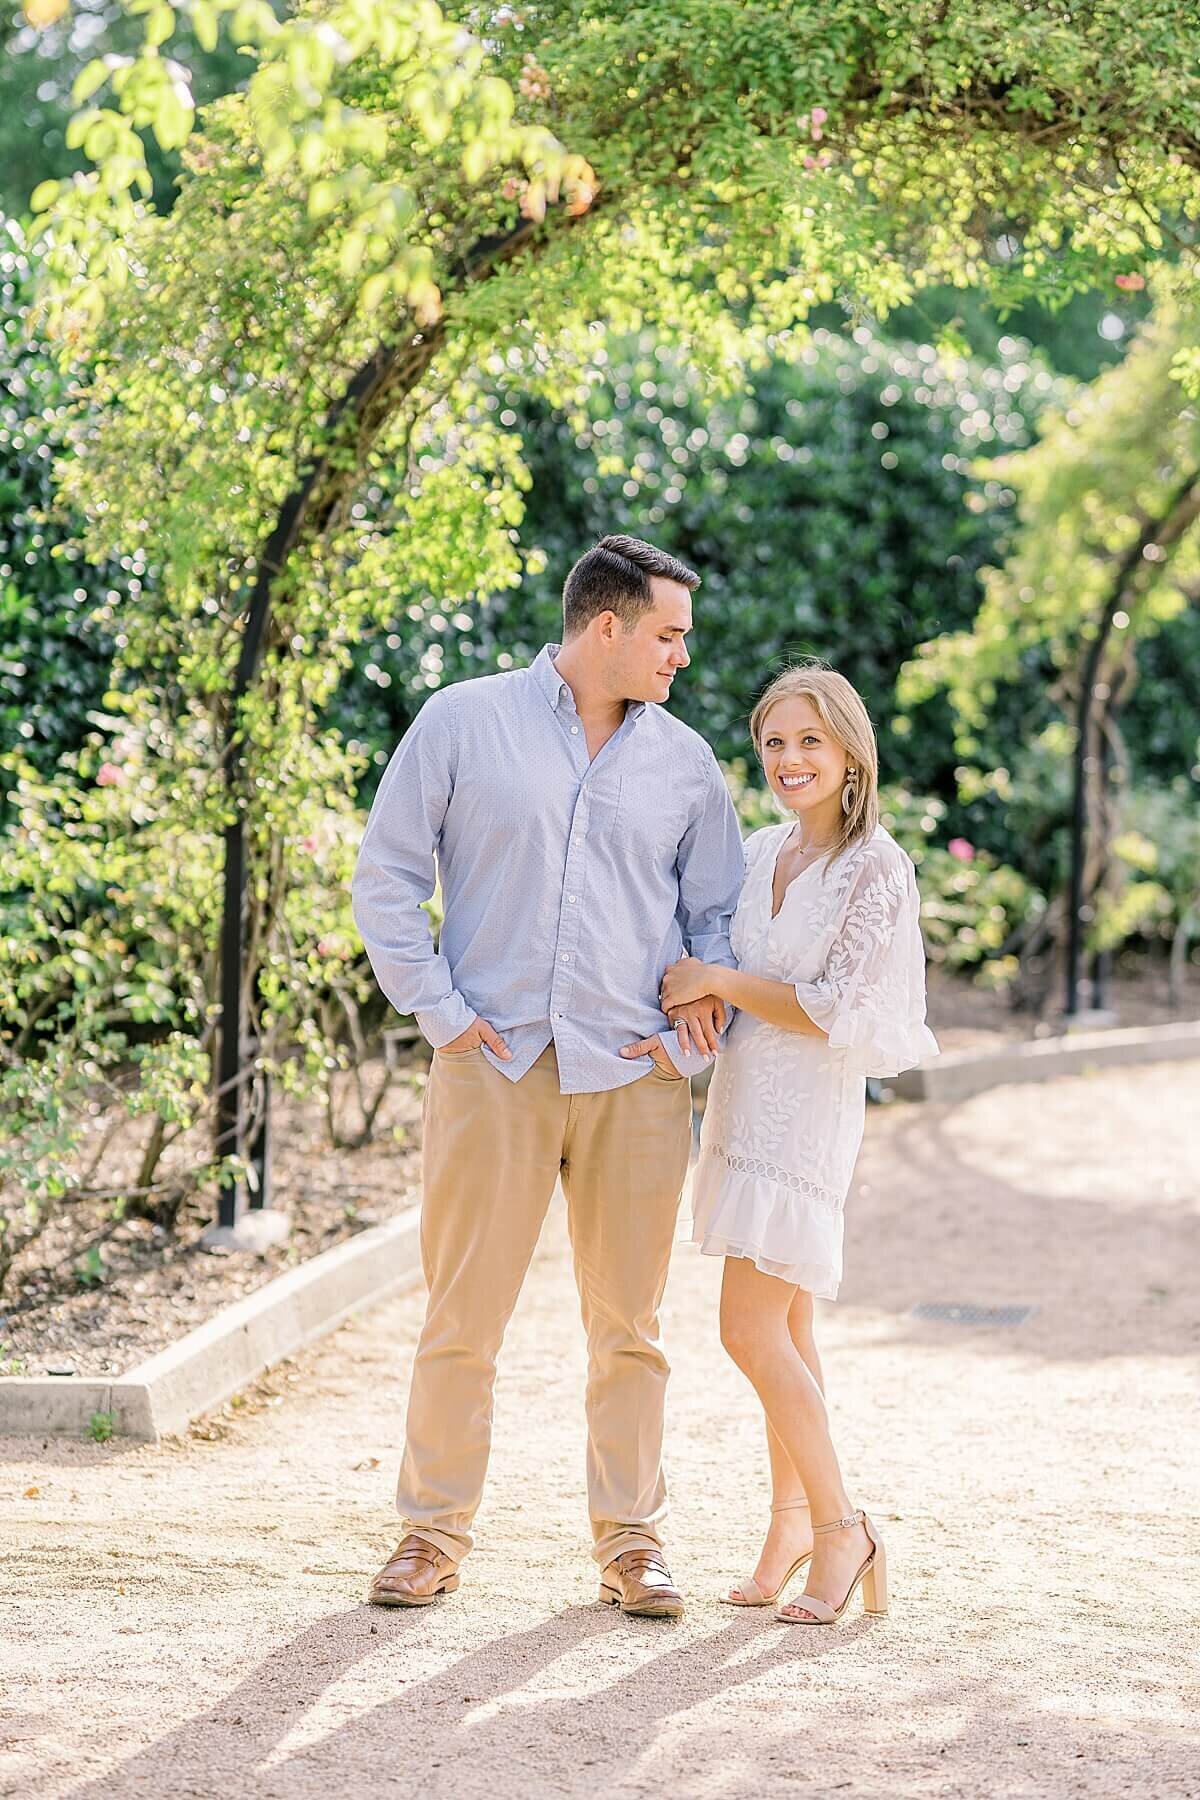 McGovern-Centennial-Gardens-Hermann-Park-Engagement-Session-Alicia-Yarrish-Photography_0044